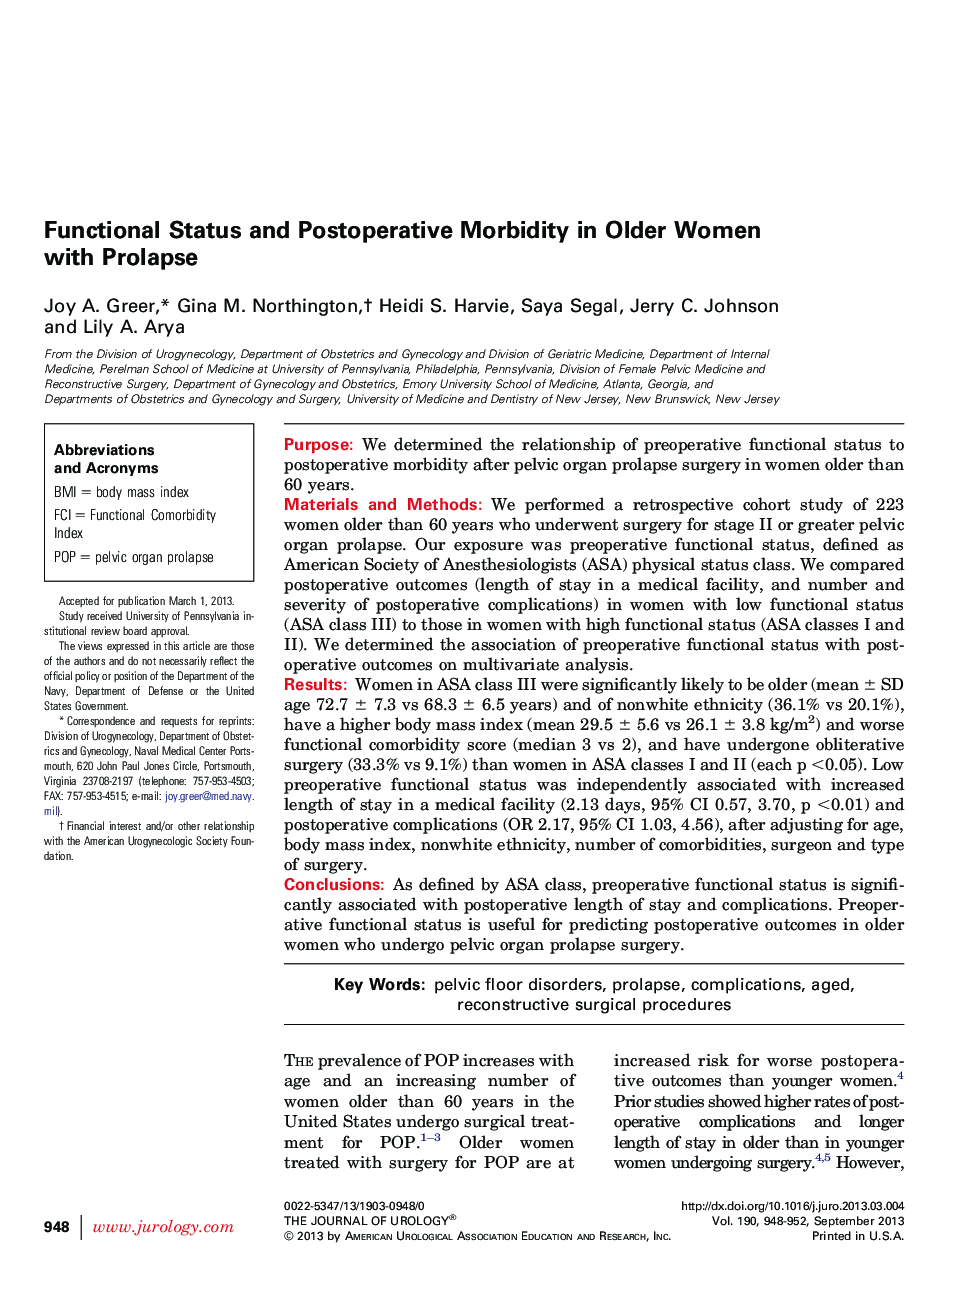 Functional Status and Postoperative Morbidity in Older Women with Prolapse 